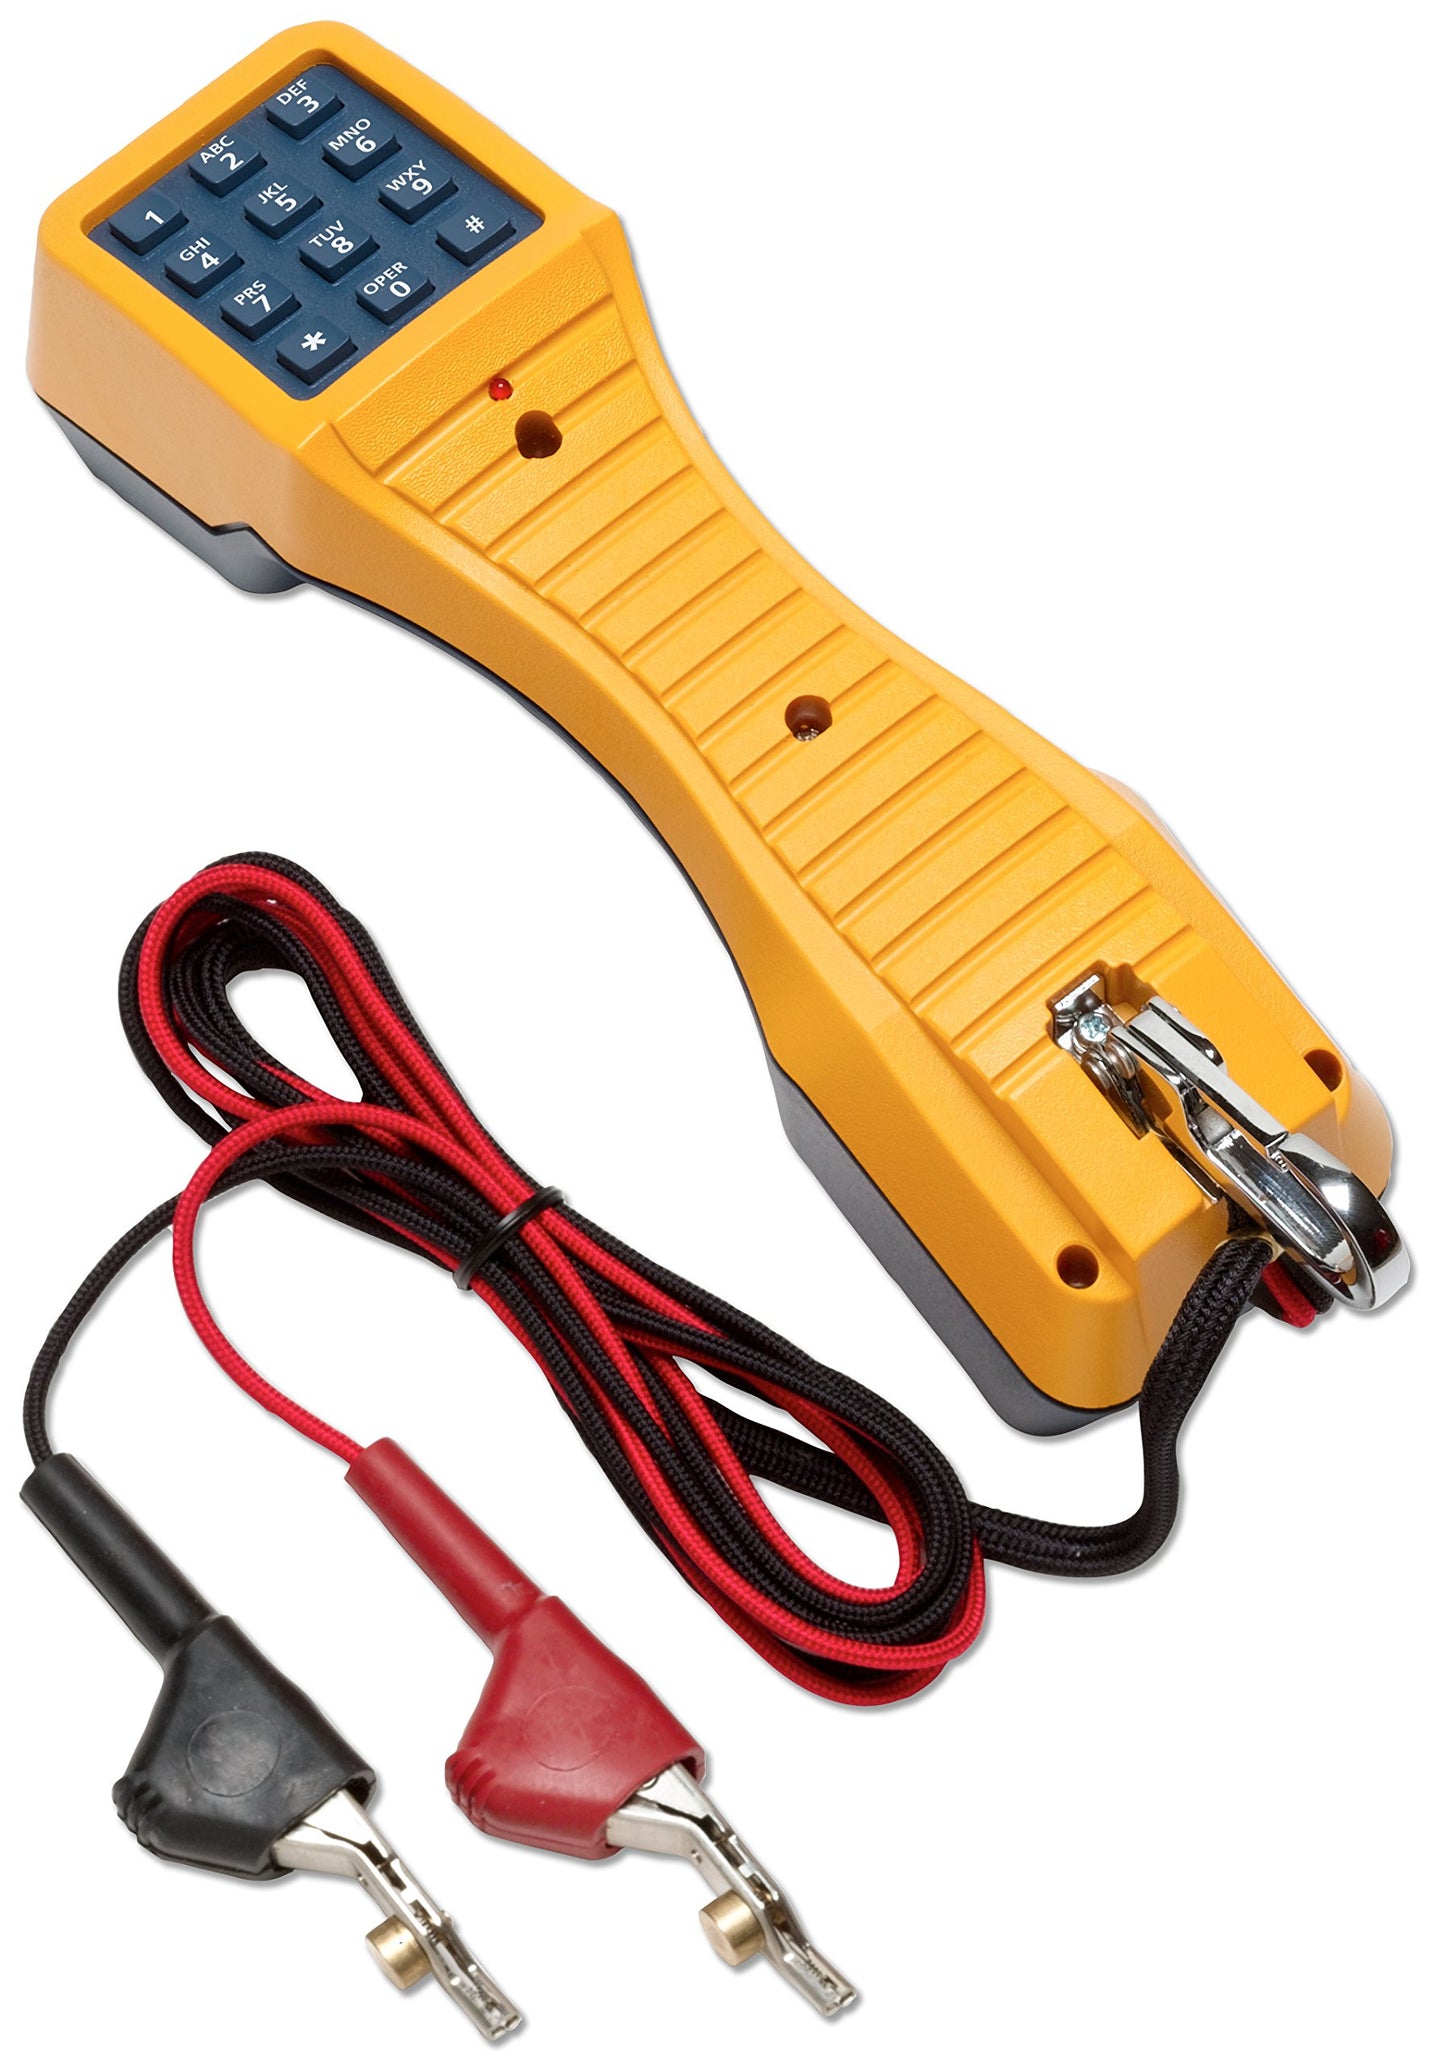 Fluke Networks 19800009 TS19 Telephone Test Set with Angled Bed-of-Nails Clips